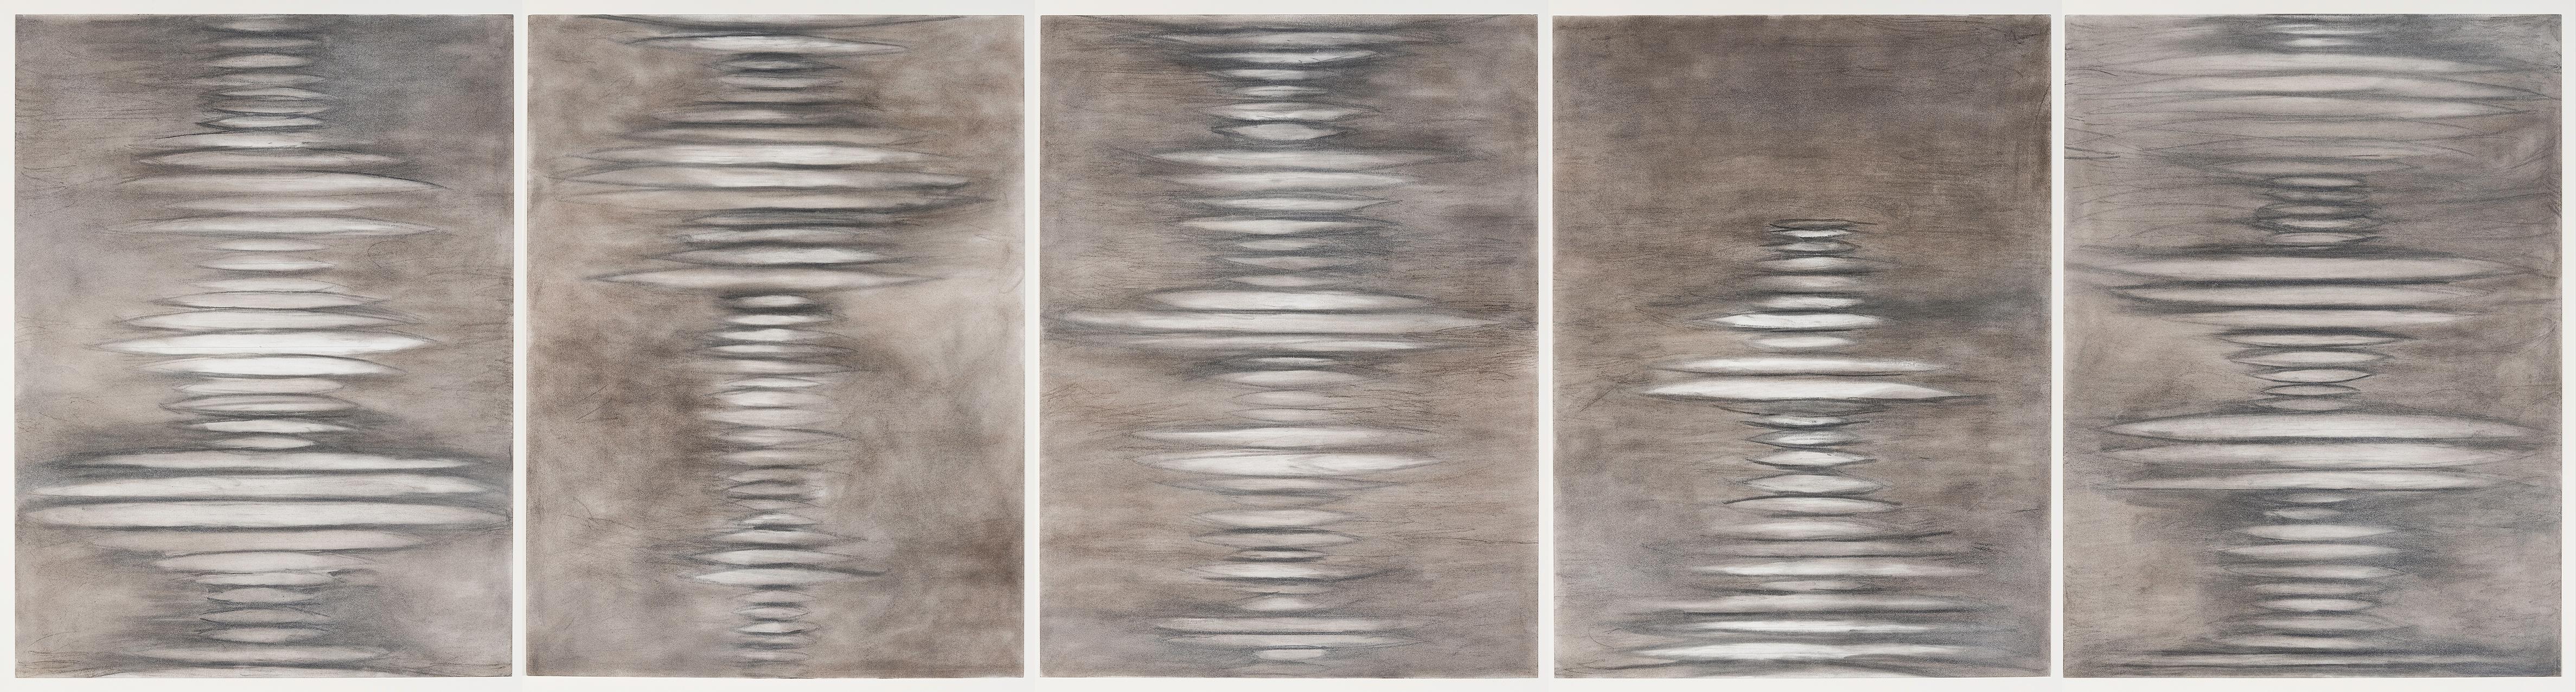 Elizabeth Turk Abstract Drawing - The Air We Breathe 2, Suite of 5 